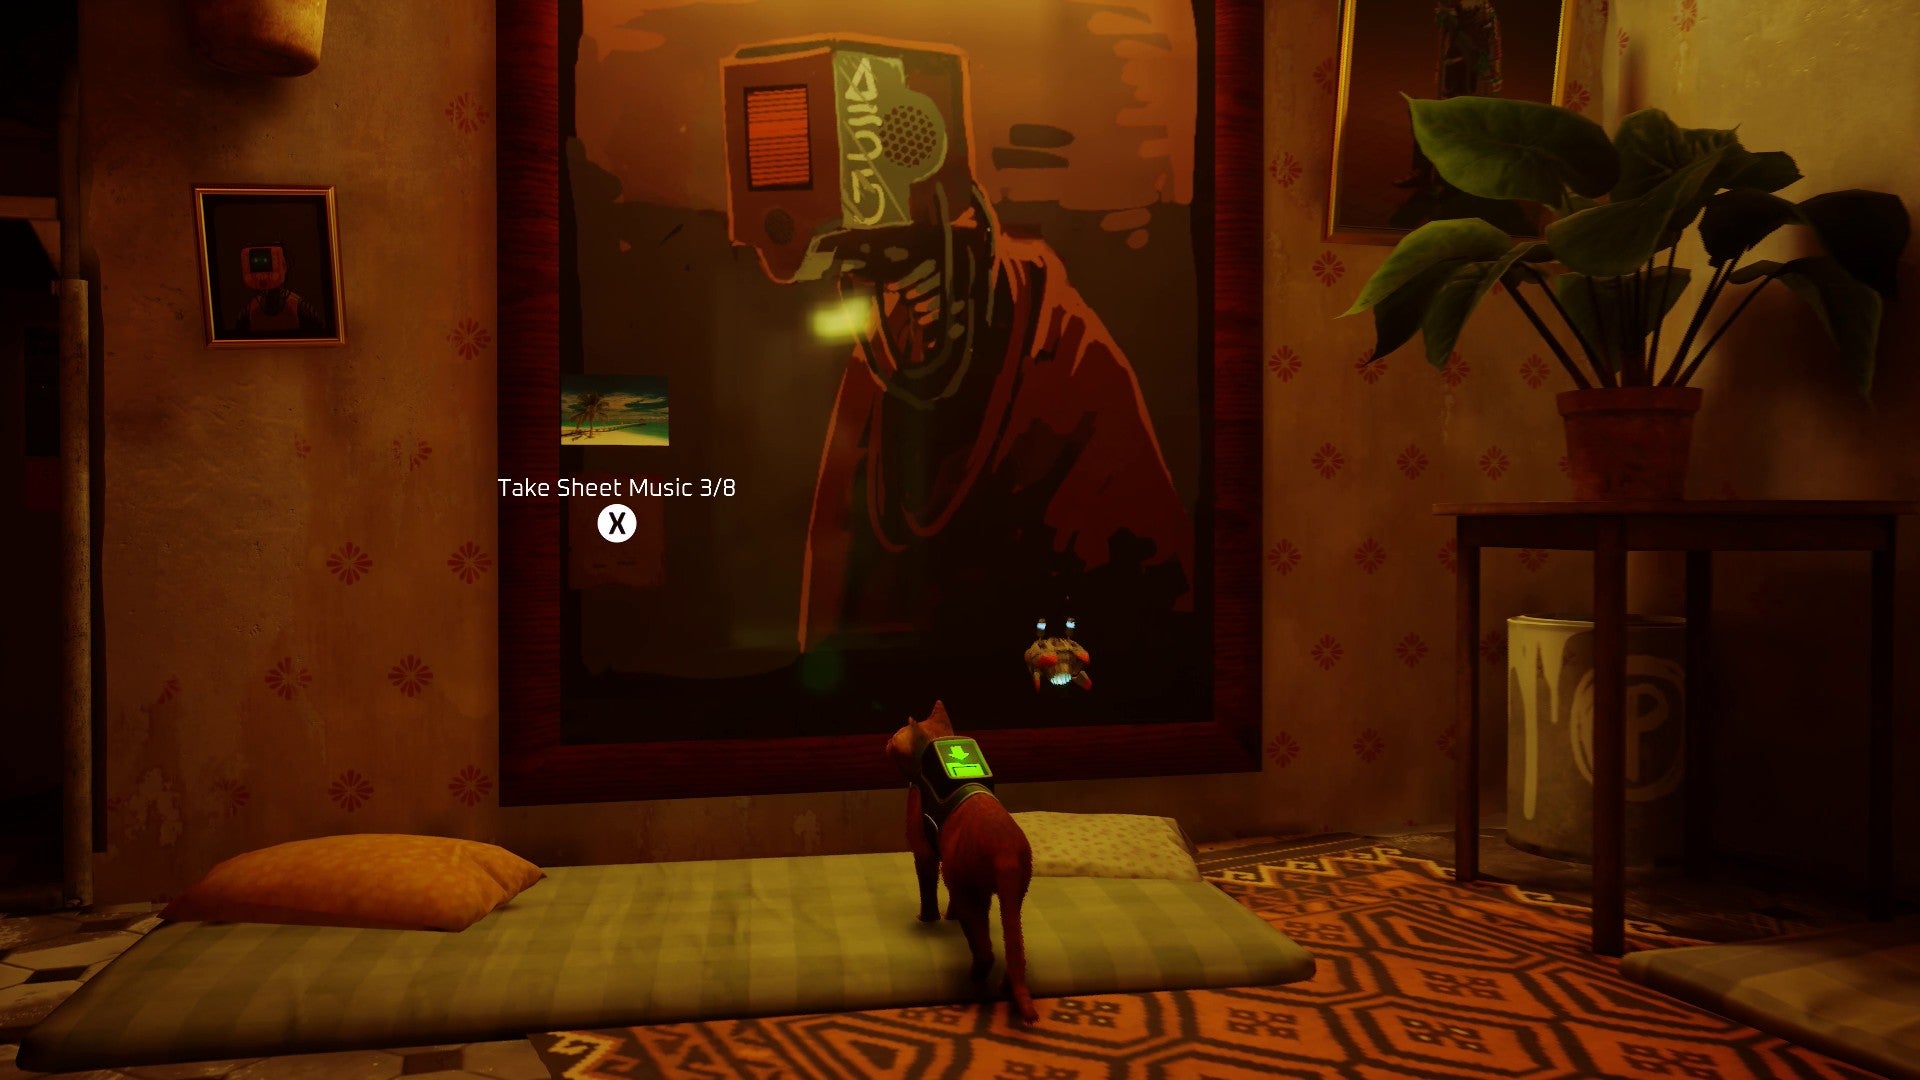 Stray screenshot showing a cat staring at a large painting on a wall. The room has a mattress on the floor, and there is a piece of sheet music attached to the painting.